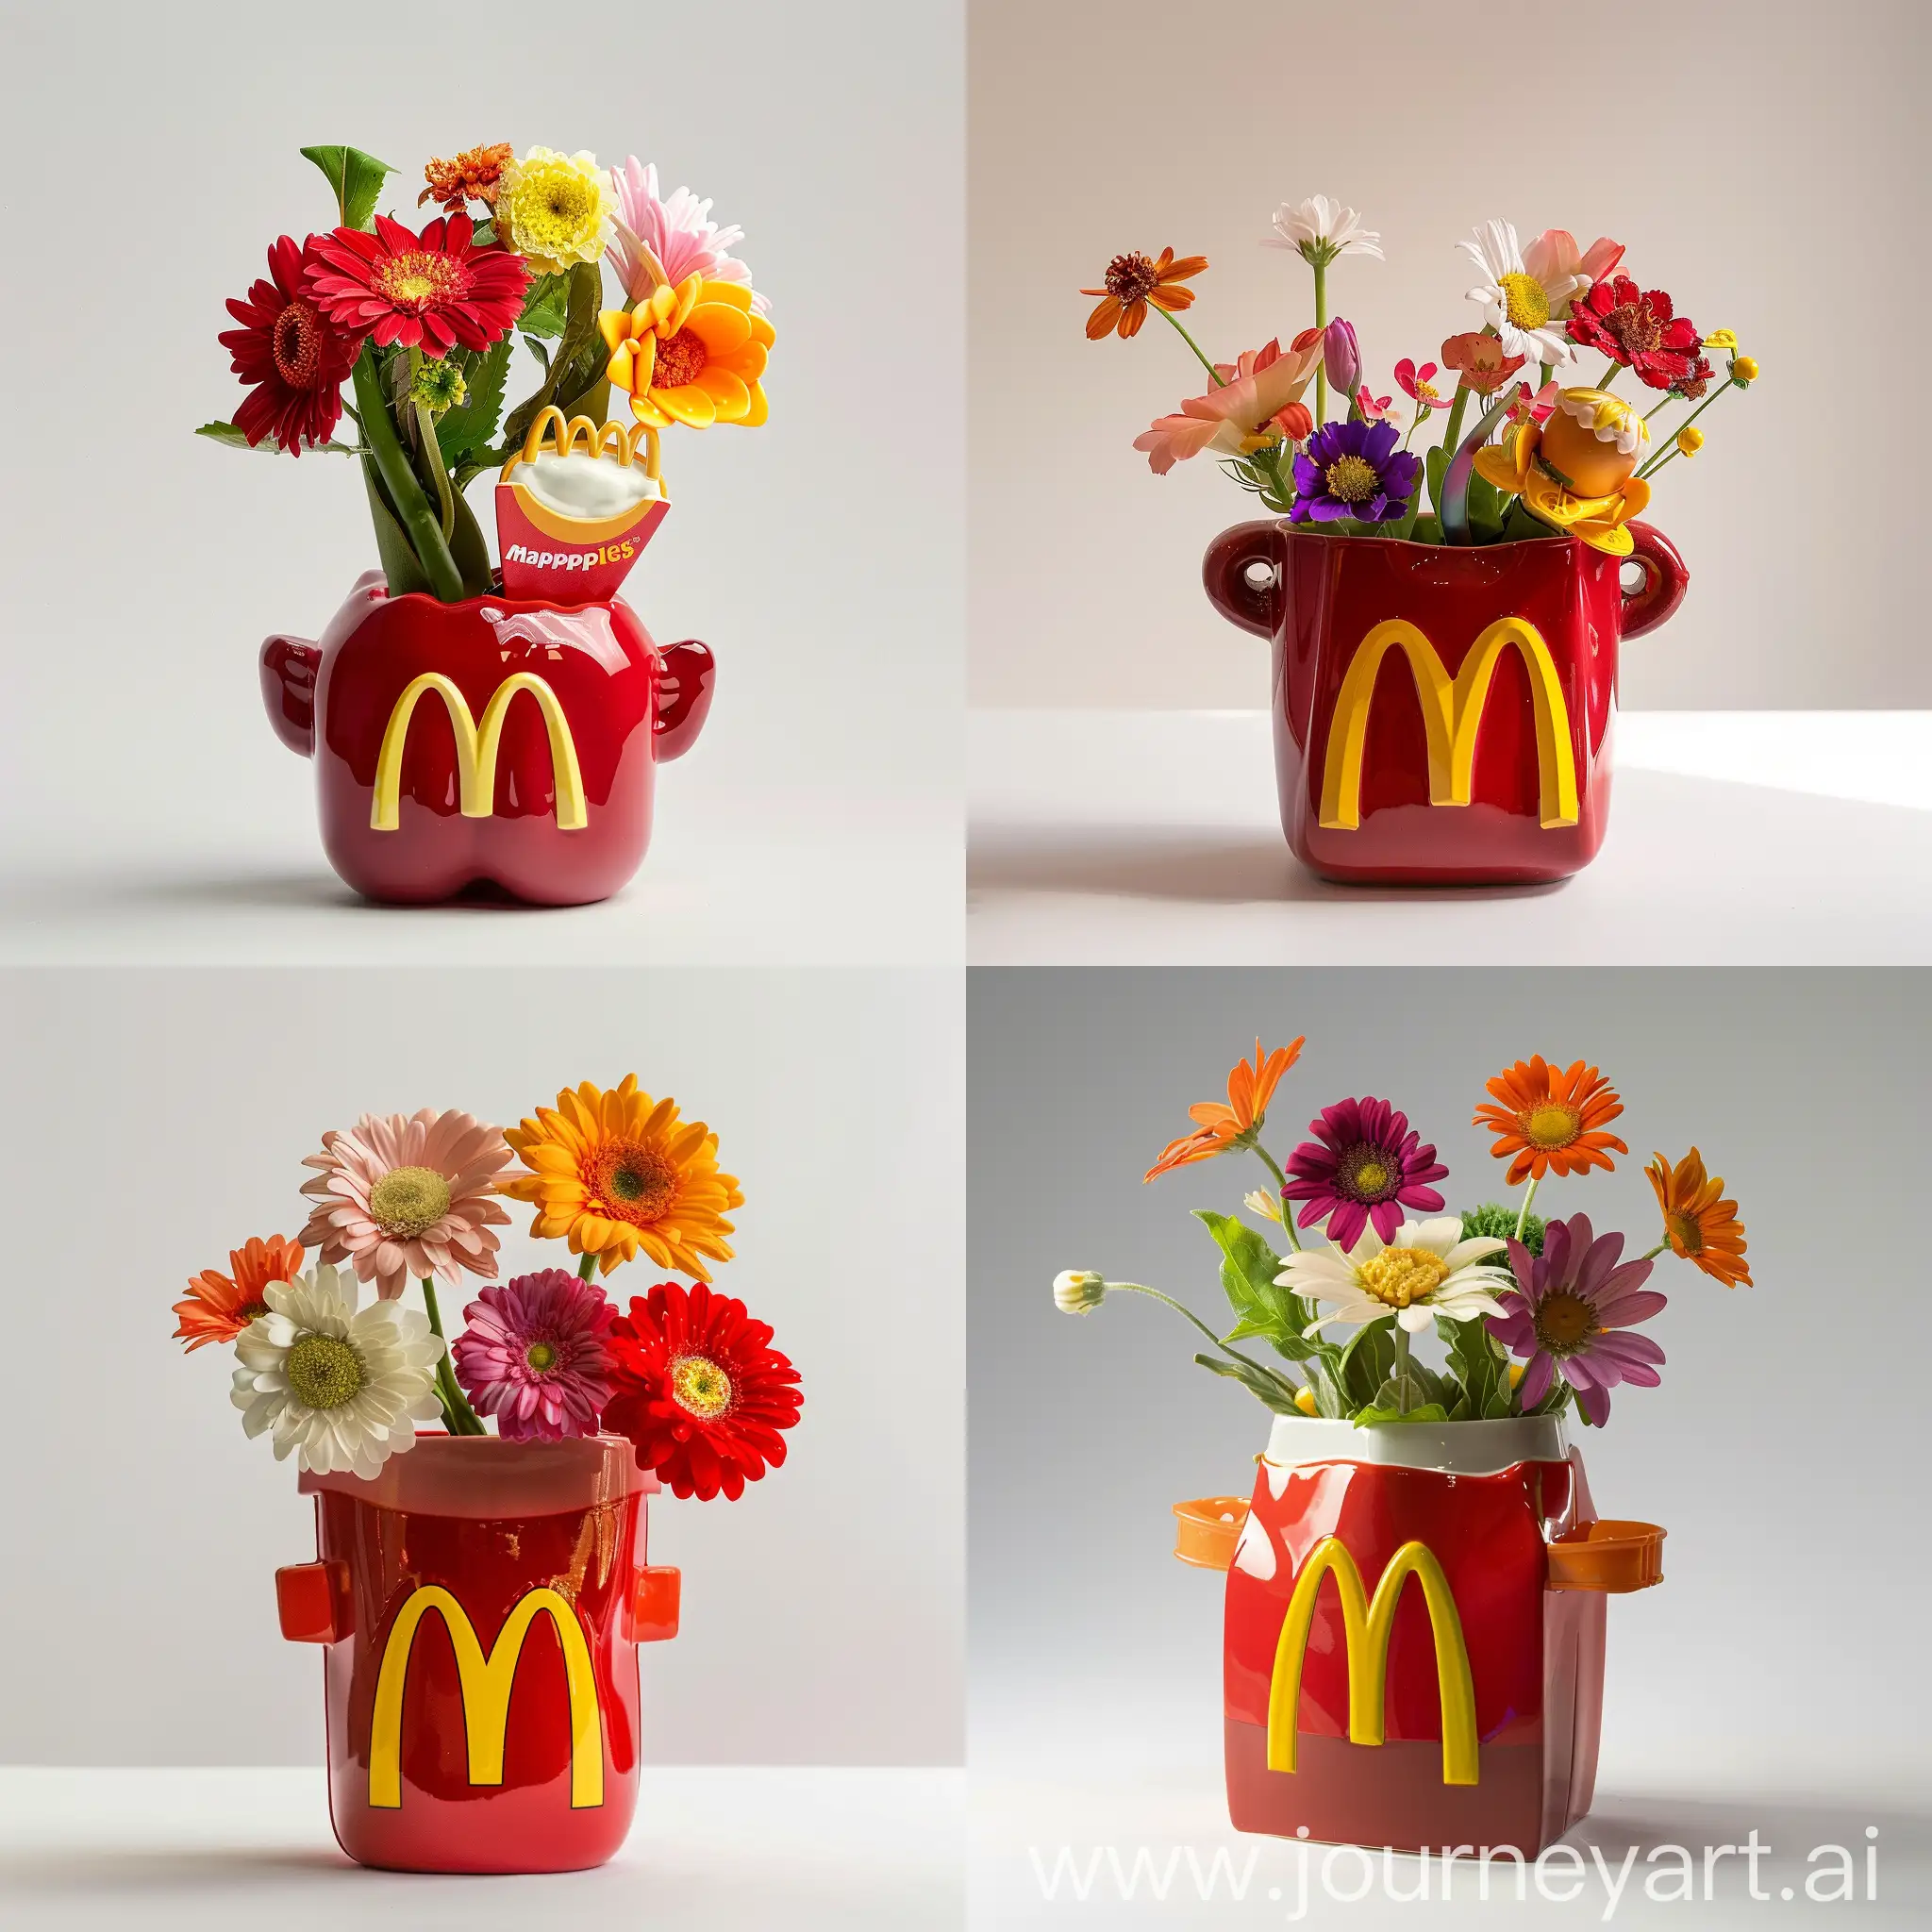 McDonalds-Happy-Meal-Flower-Vase-Whimsical-Decor-Inspired-by-Fast-Food